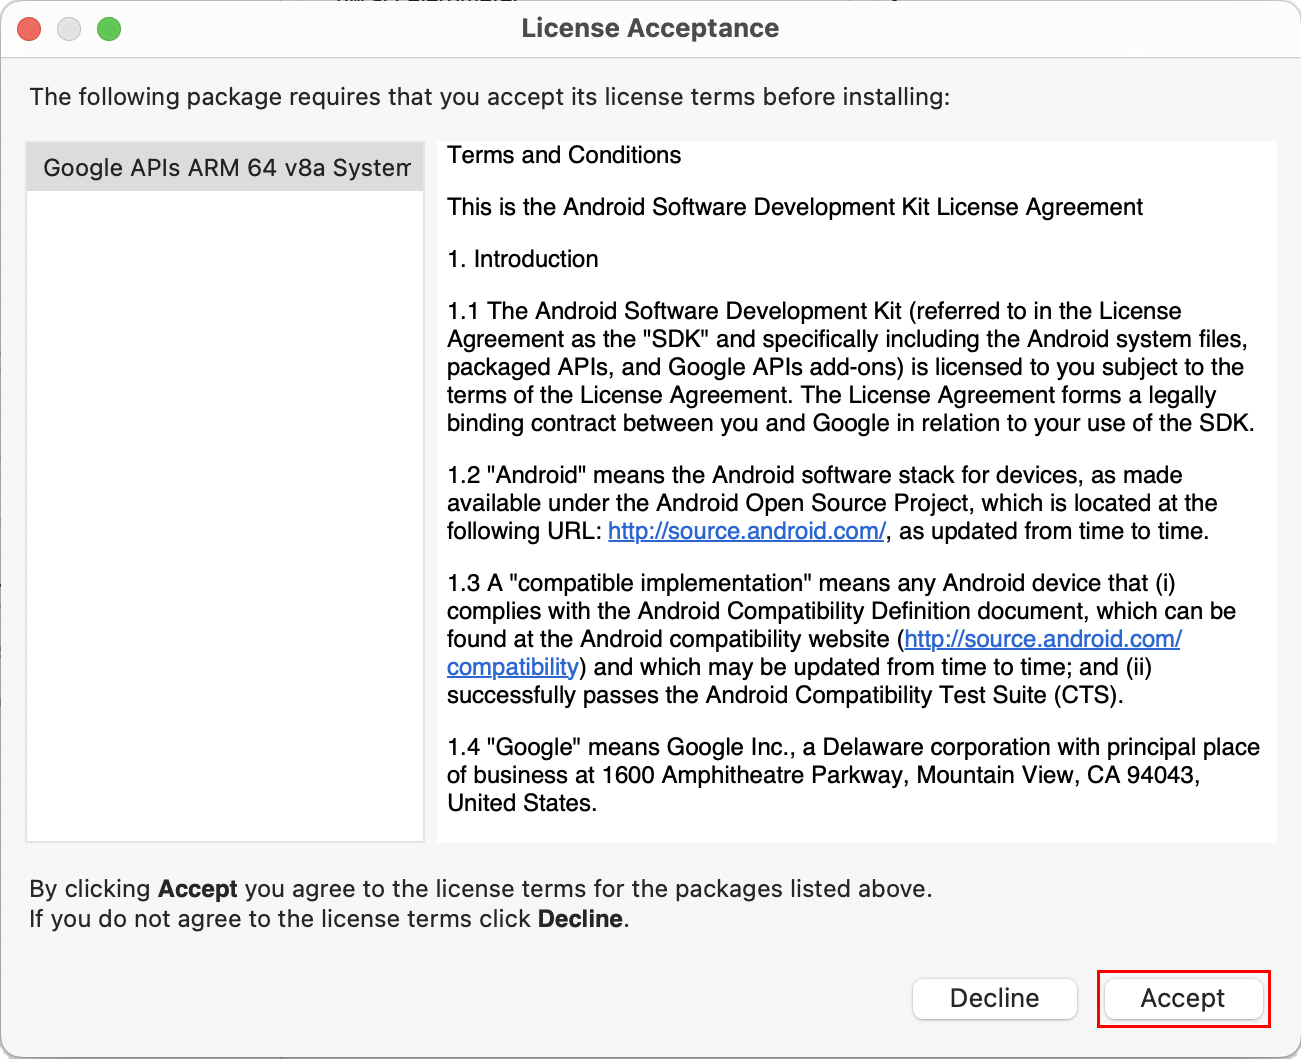 The License Acceptance dialog describing the terms and conditions for using the Android Software Development Kit.